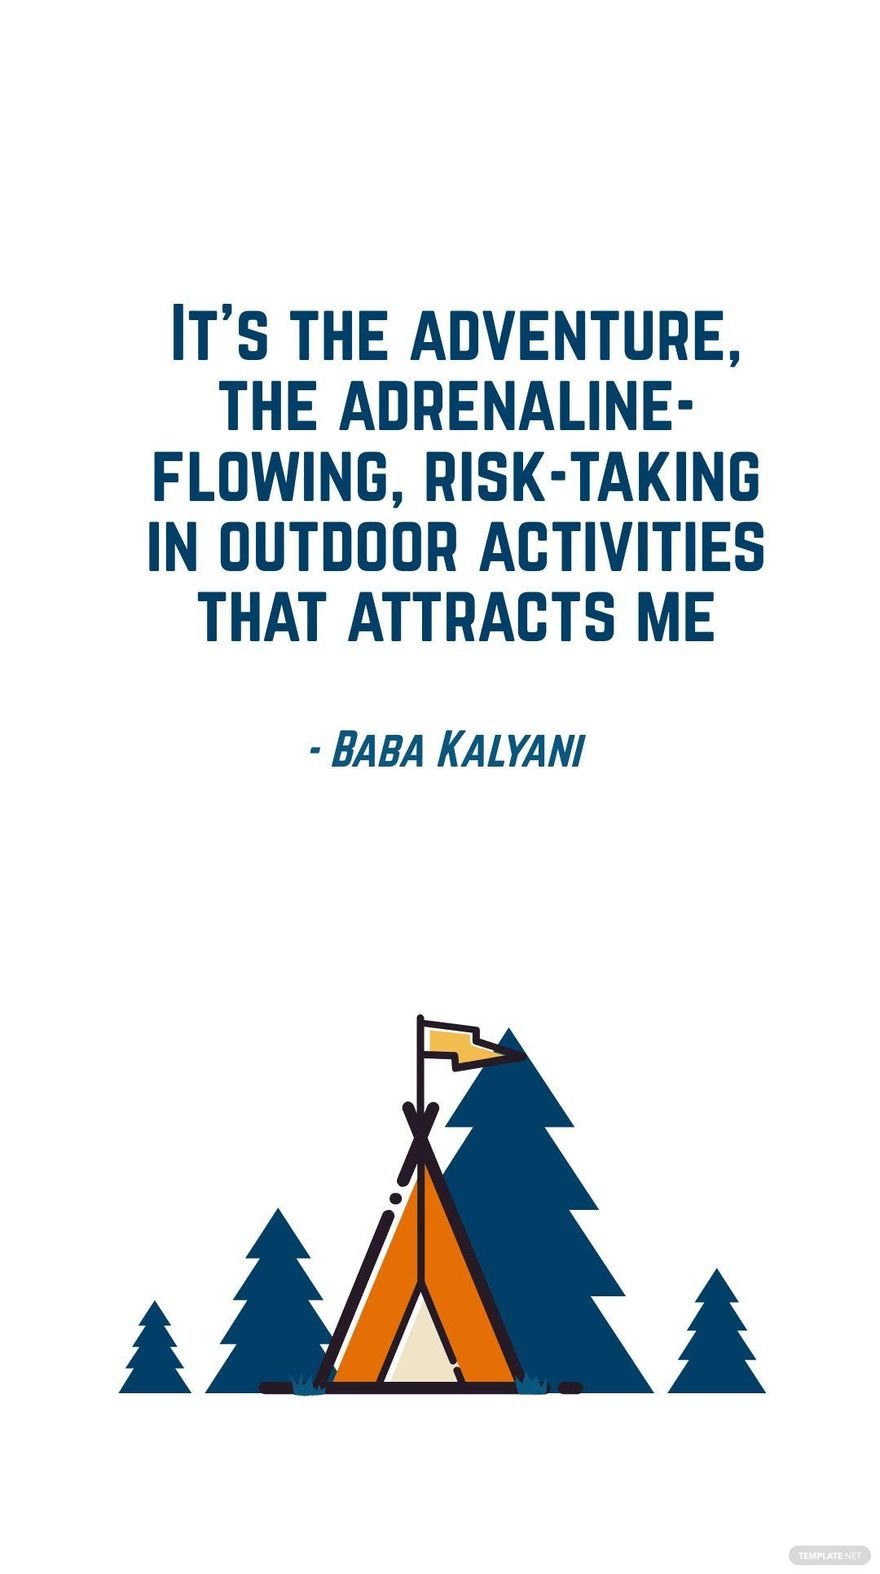 Baba Kalyani - It's the adventure, the adrenaline-flowing, risk-taking in outdoor activities that attracts me in JPG